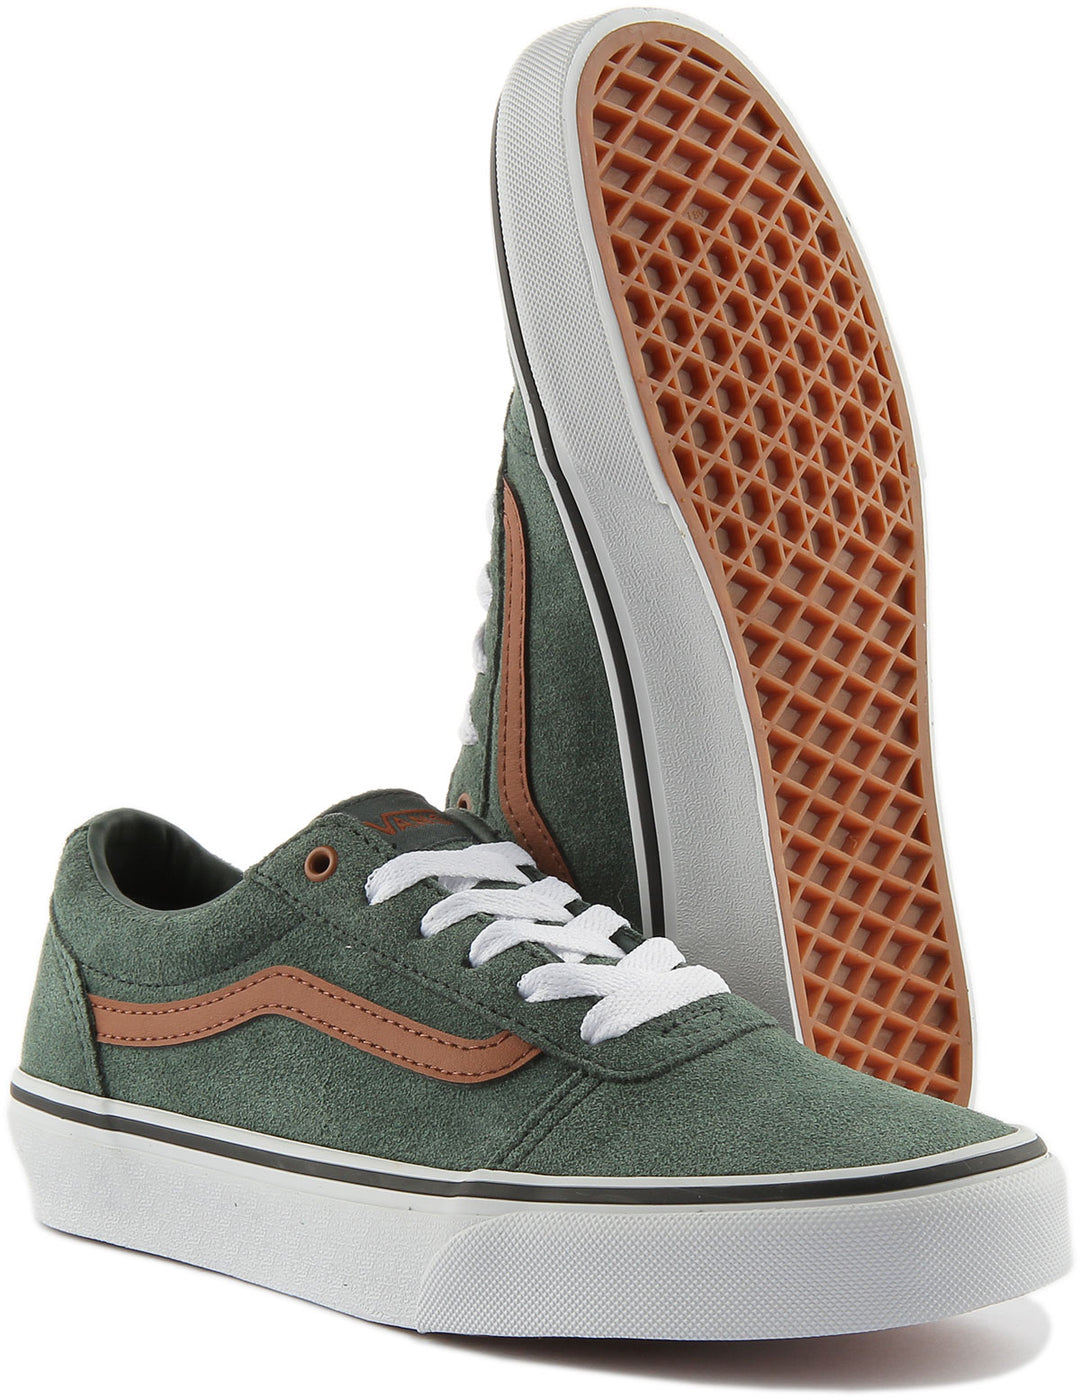 Vans Ward In Green Brown For Youth